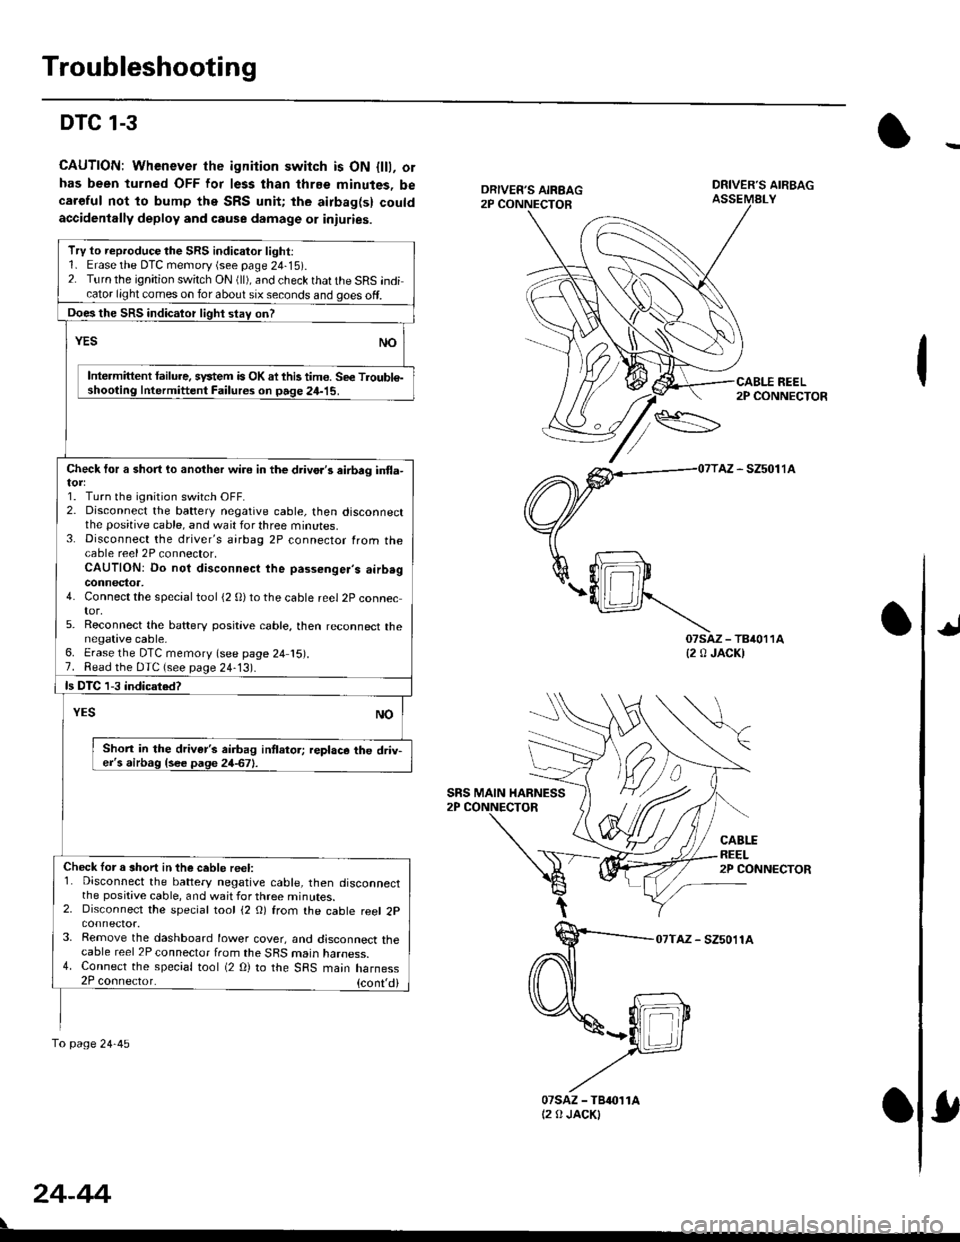 HONDA CIVIC 1996 6.G Service Manual Troubleshooting
DTC 1-3
CAUTION: Whenever the ignition switch is ON {lll, orhas been turned OFF lor less than thrEe minutes, becaroful not to bump the SRS unit; the airbag(s) couldaccidenlally deploy 